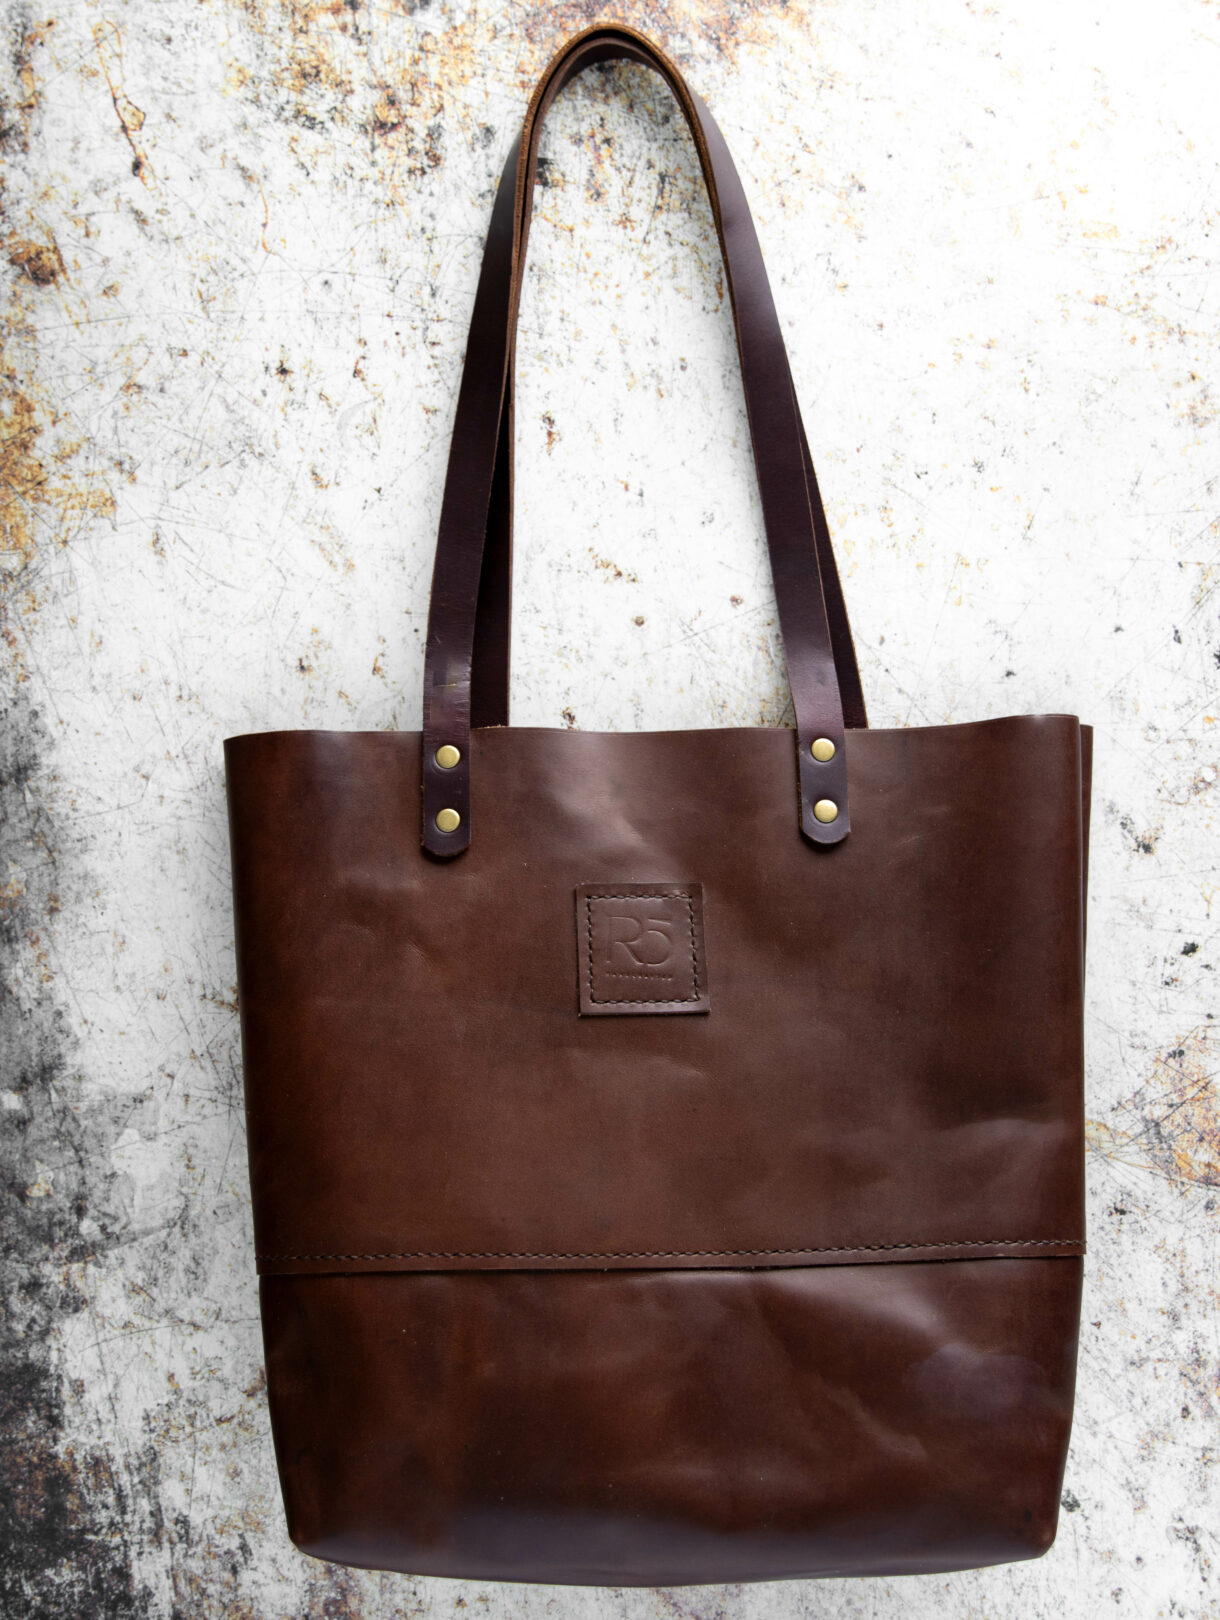 R5 Leather bags 047 scaled - Pelavida - Shop For Life